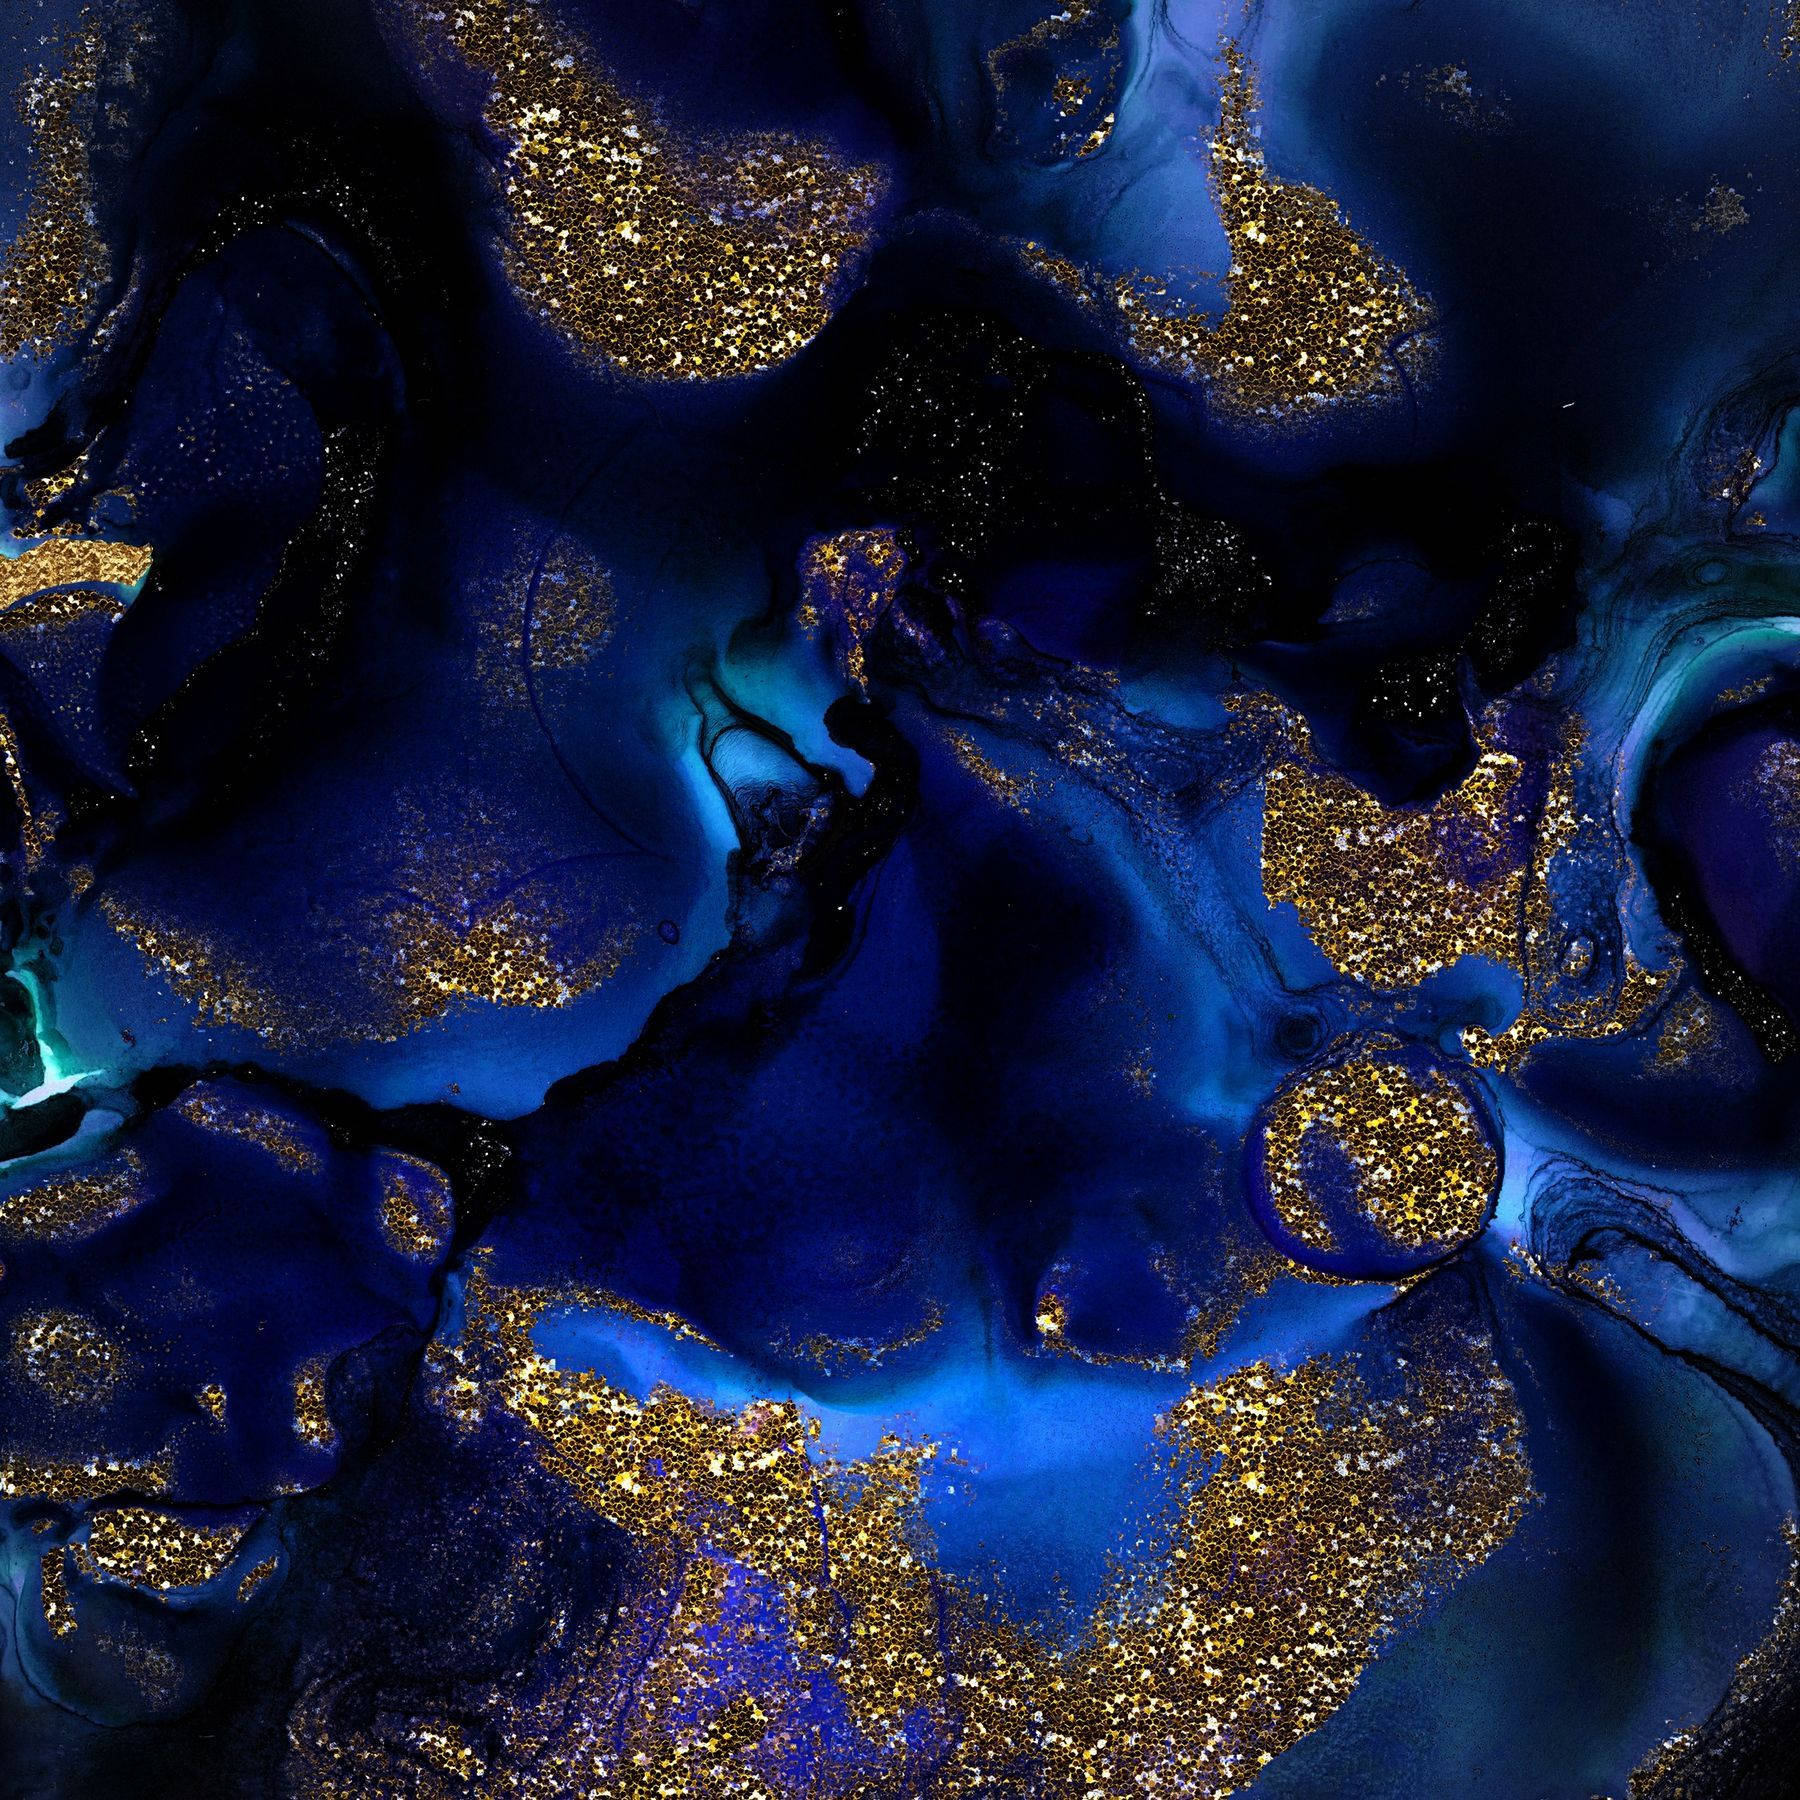 A blue and gold image of the earth - Indigo